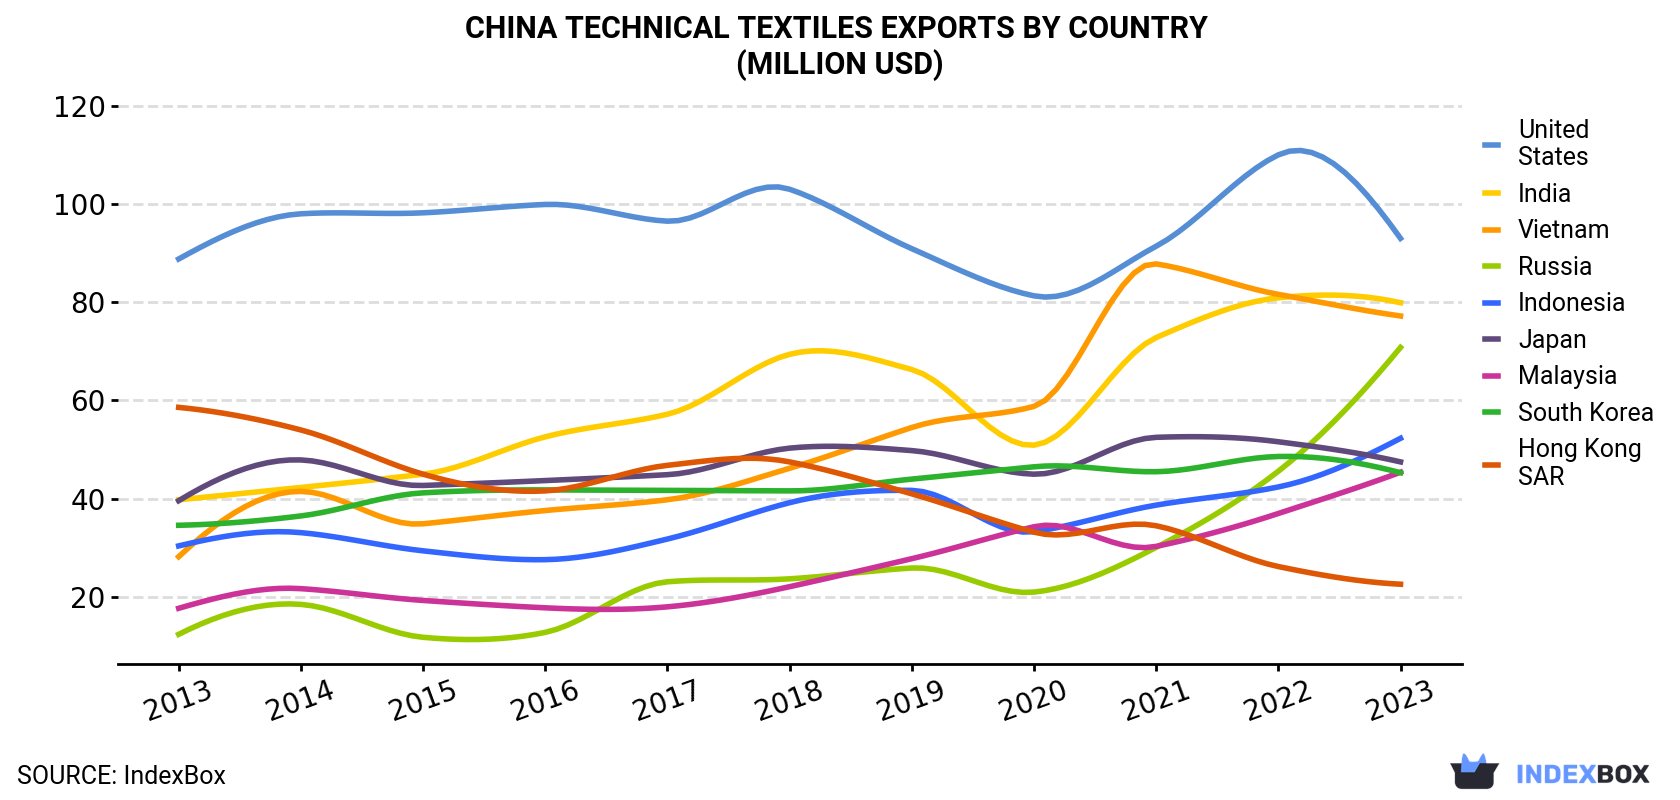 China Technical Textiles Exports By Country (Million USD)